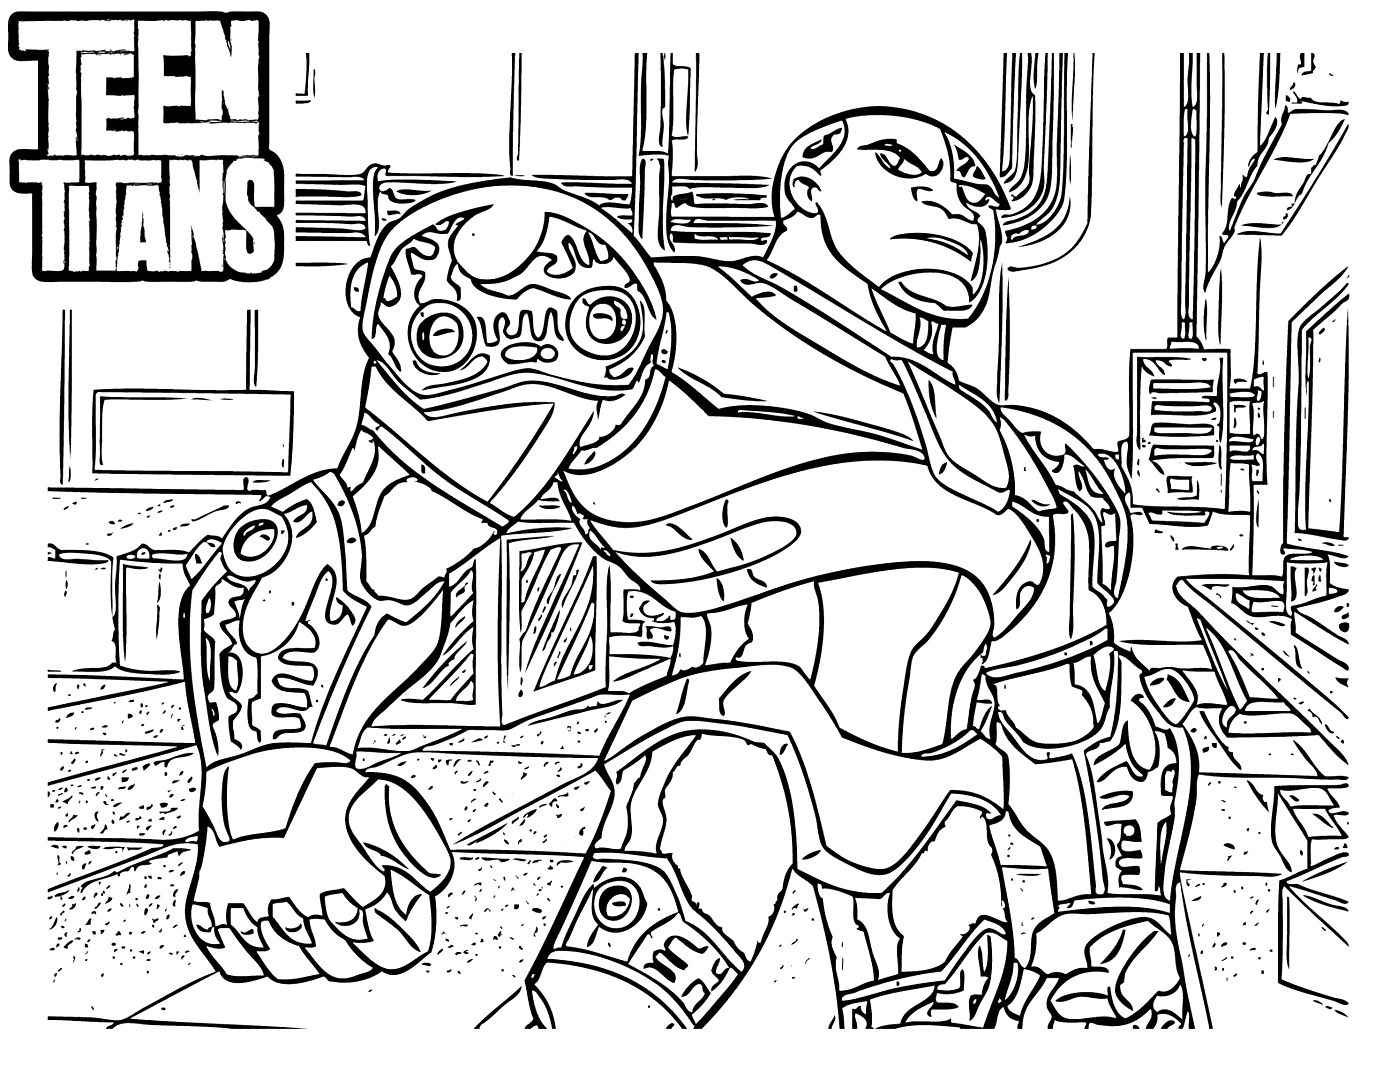 Cyborg Teen Titans Coloring Page